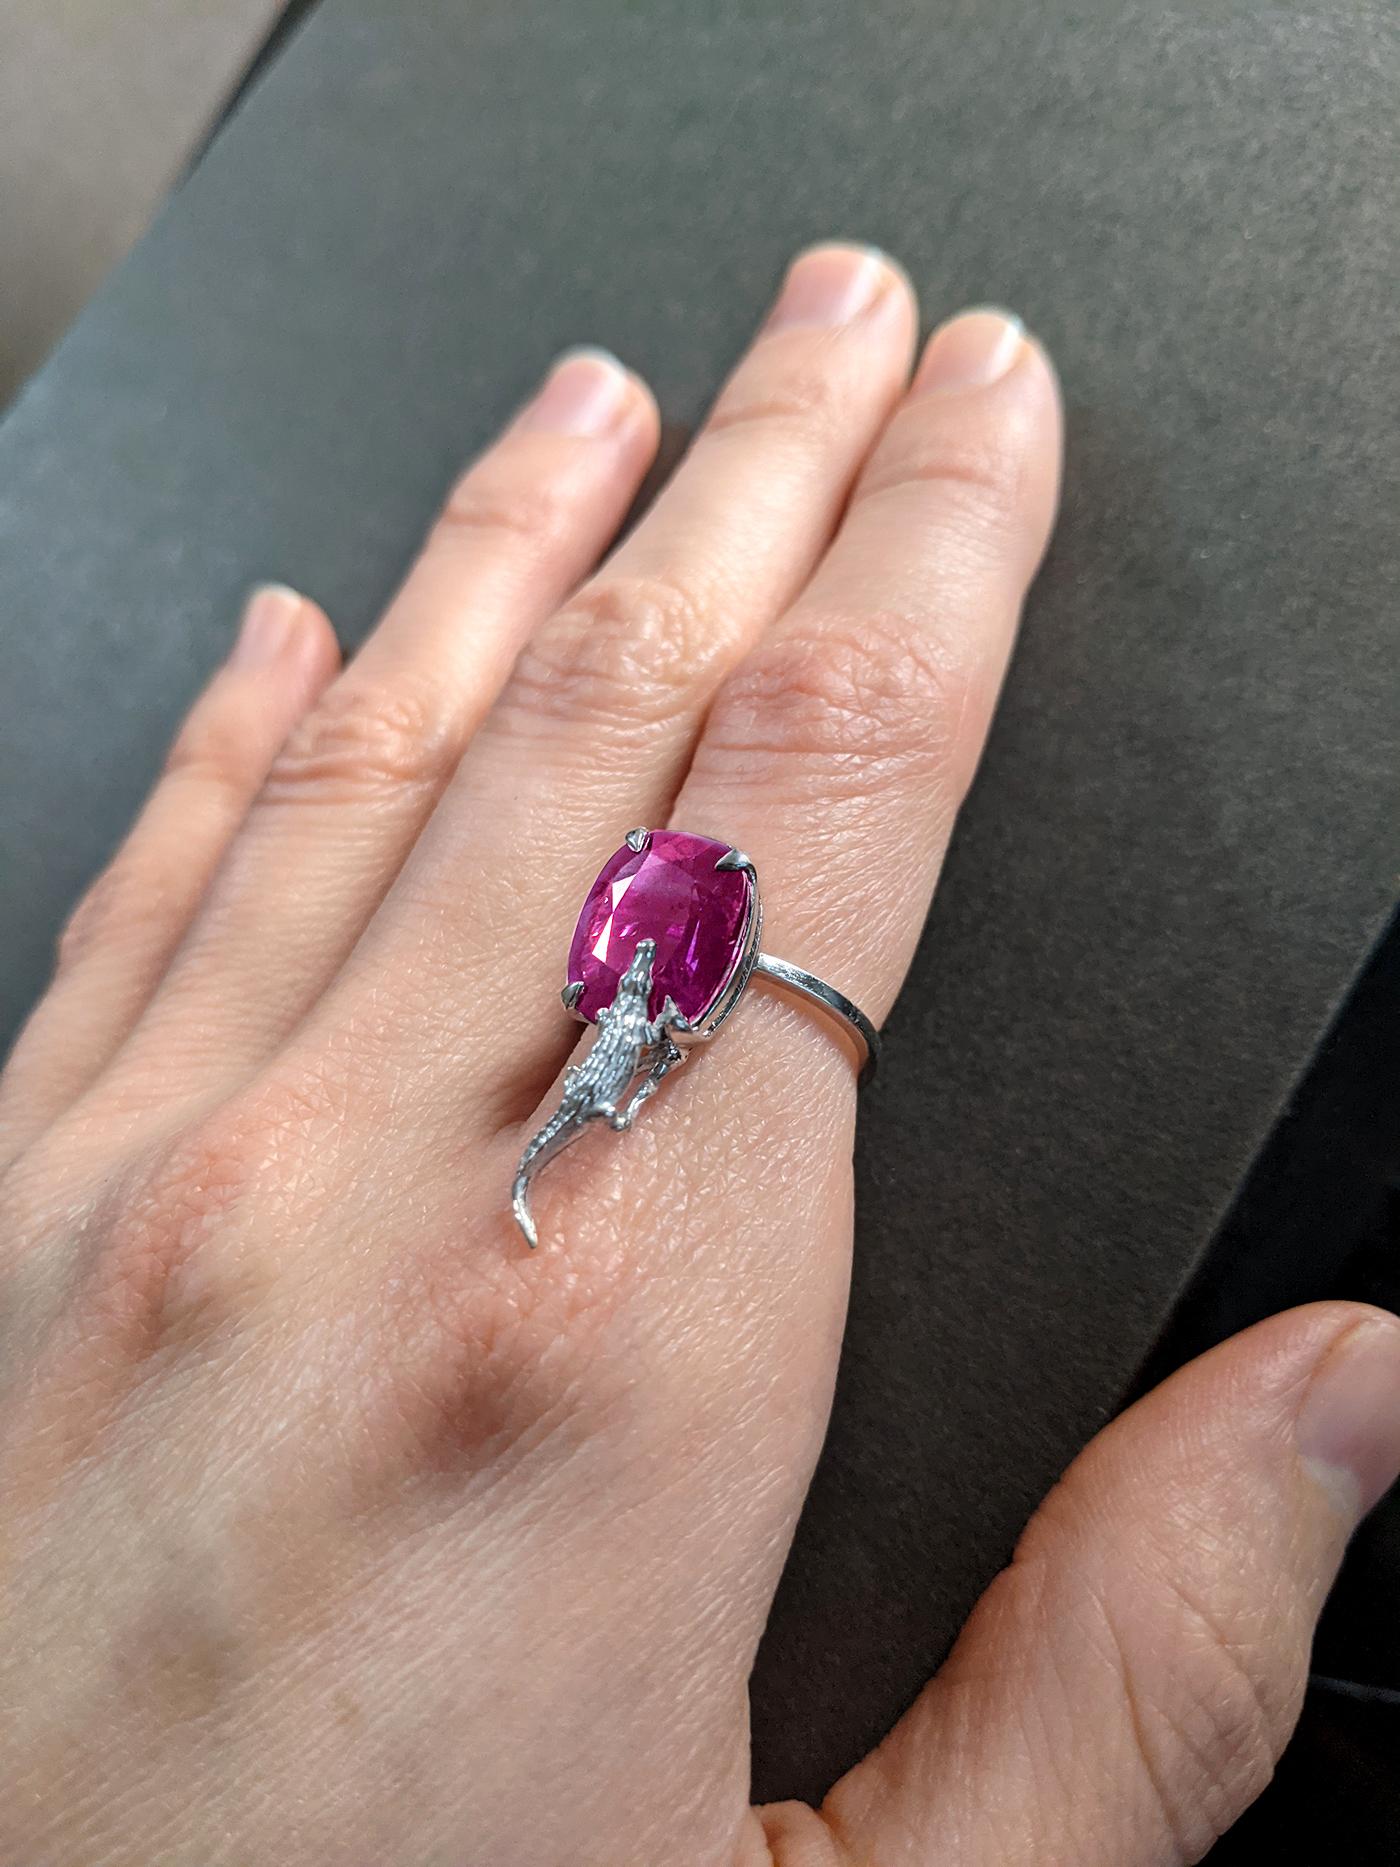 This 18 karat yellow gold contemporary Mesopotamian ring by the artist is encrusted with 3.64 carats of natural pink spinel from Burma (Myanmar), featuring a rare cushion author perfect cut with breathtaking pink color measuring 9.55x7.98x5.67 mm.